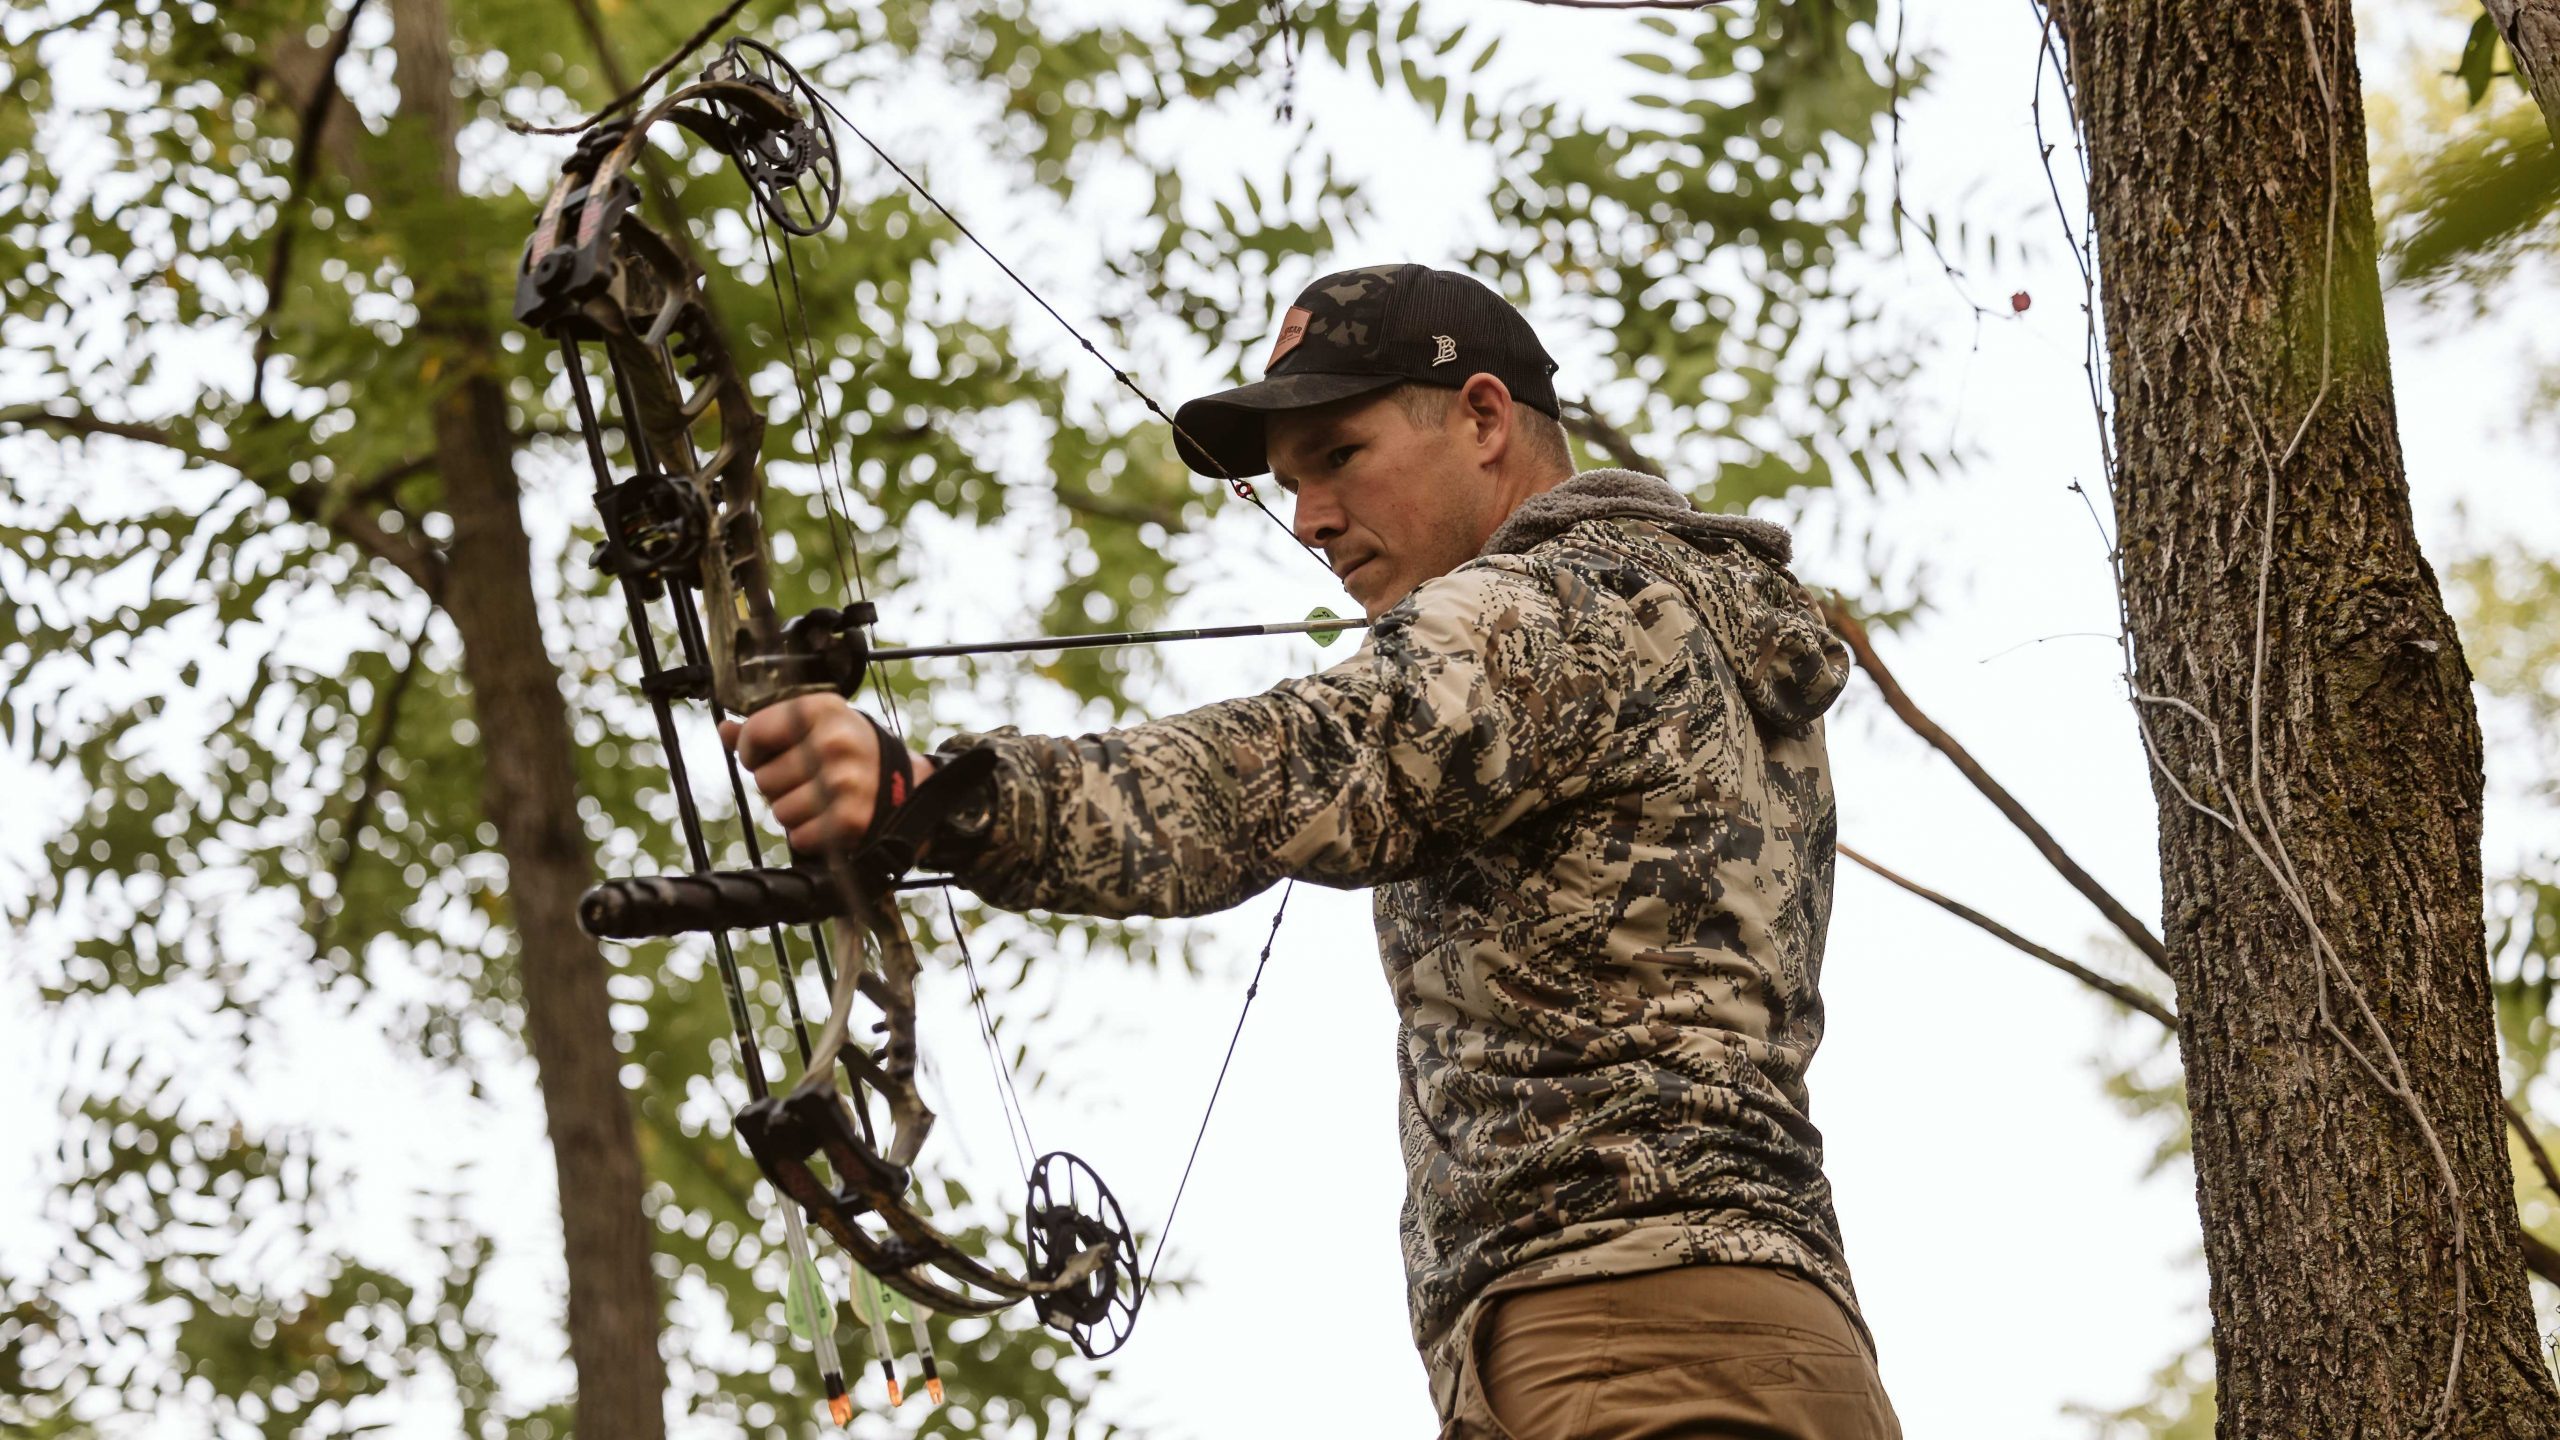 OutdoorHub Holiday Gift Guide: Bows for Holiday Deer